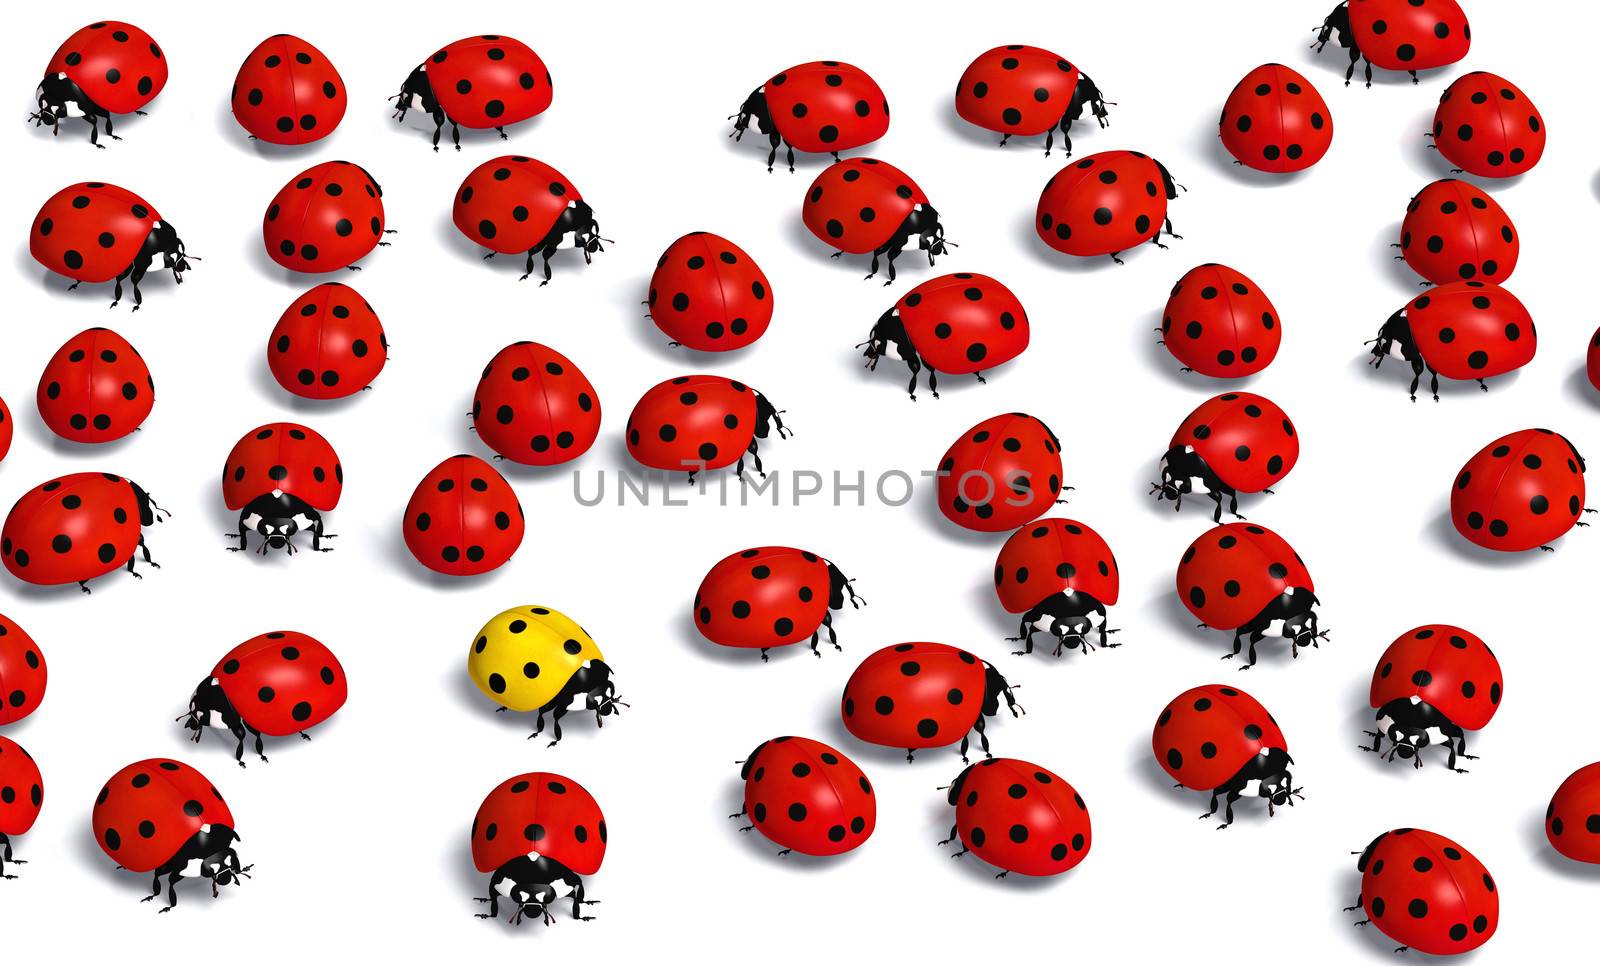 unique yellow ladybug stays in the middle of a crowd of the red ones, on a white background